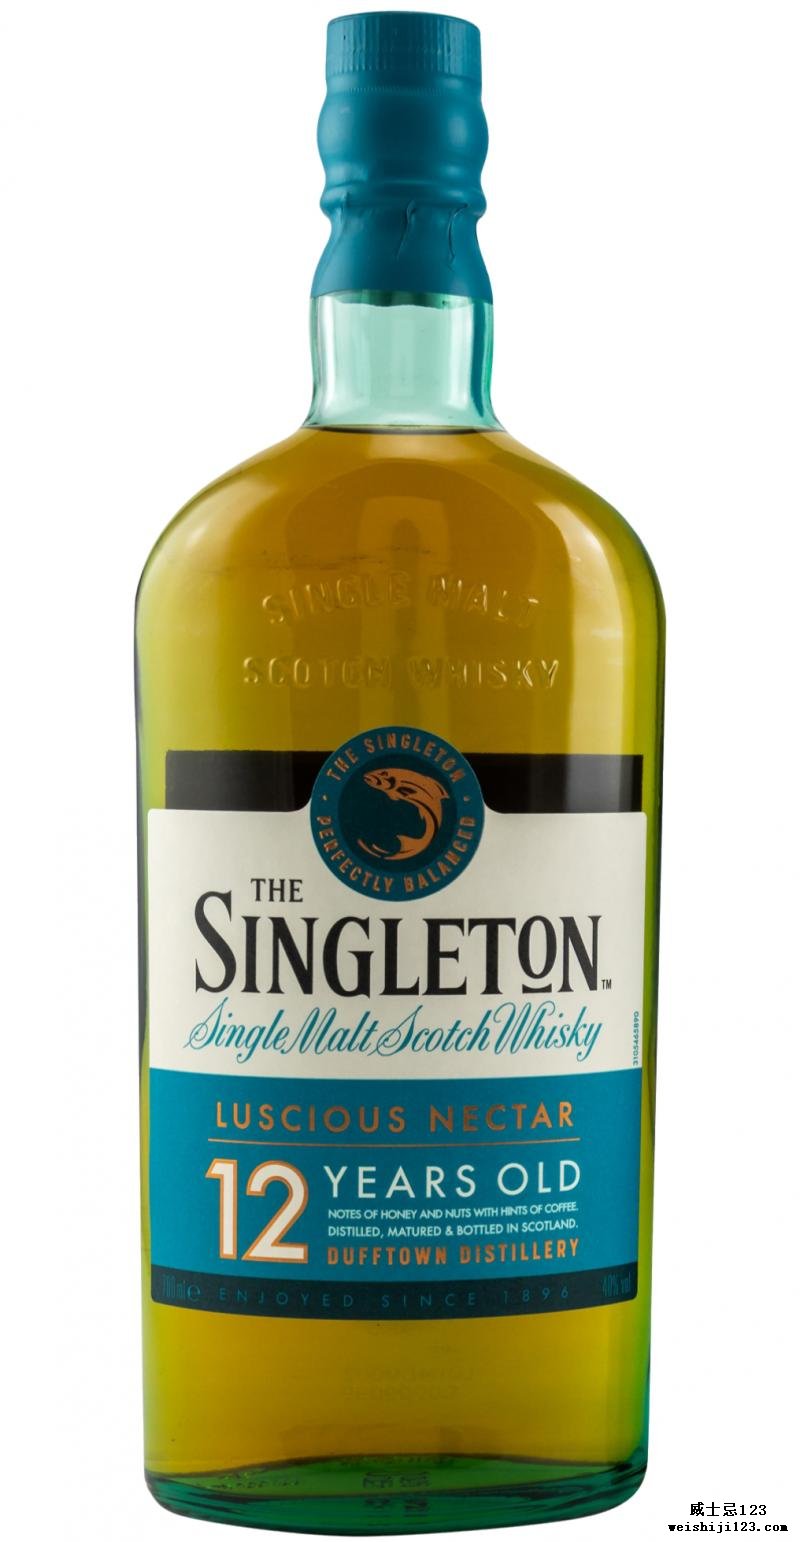 The Singleton of Dufftown 12-year-old